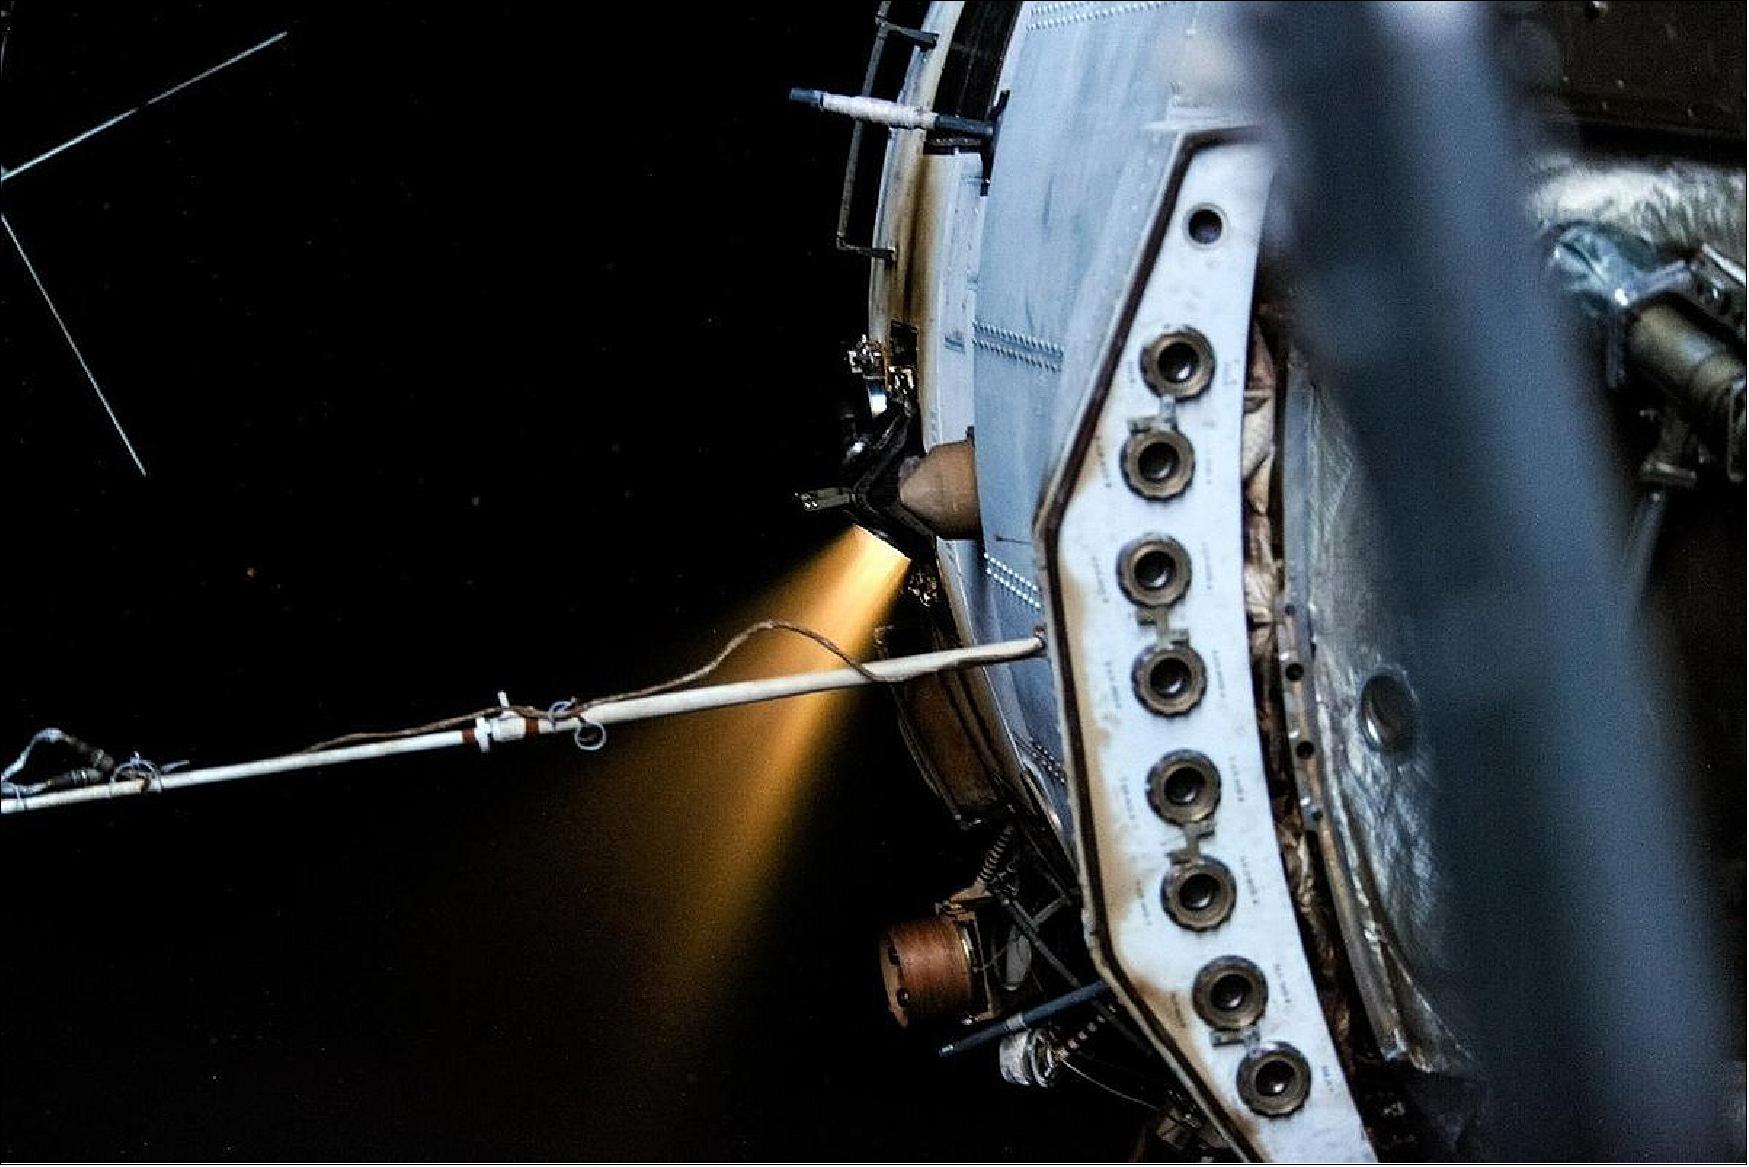 Figure 4: The ISS adjusted its orbit to create the right conditions to welcome Luca’s Soyuz and the cargo vehicle and later this month the Progress MS-12 supply spacecraft. The Russian Zvezda module fired its engines for 34 seconds in the middle of the night on 2 July 2019, raising the orbit to 436 km above Earth (image credit: ESA)